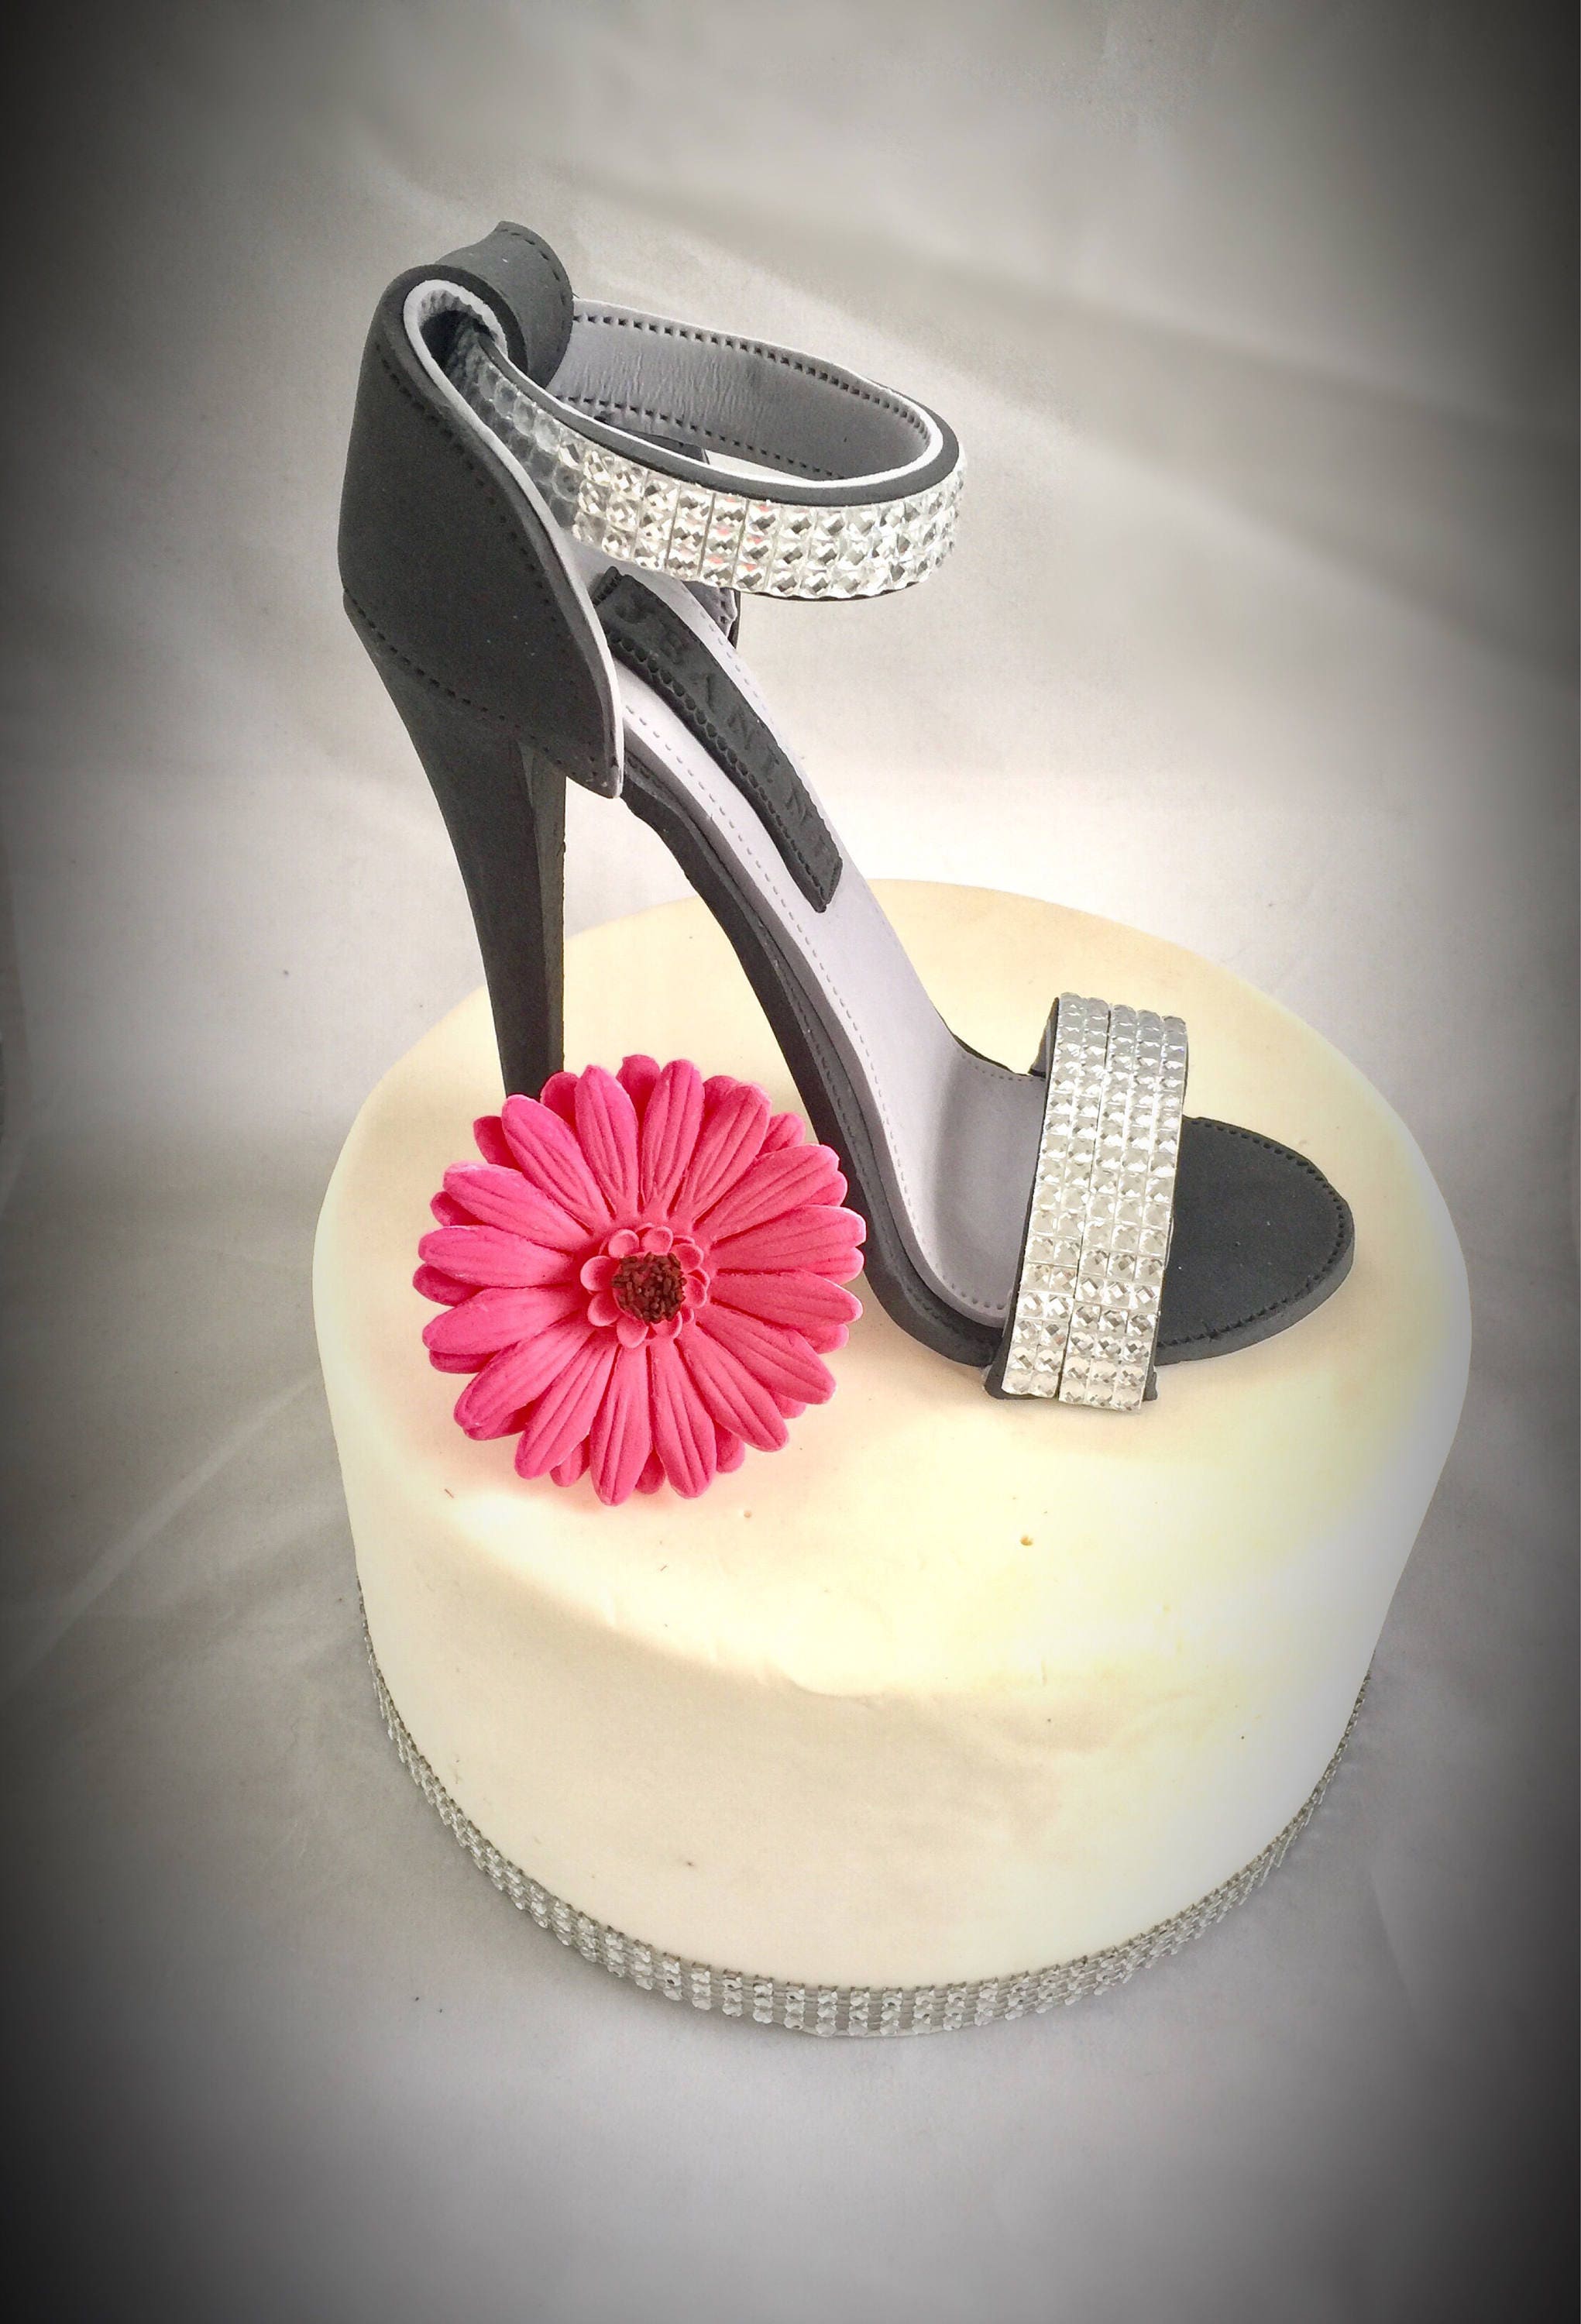 Sexy Legs High Heels Silhouette Party Birthday cake Toppers Decor | eBay